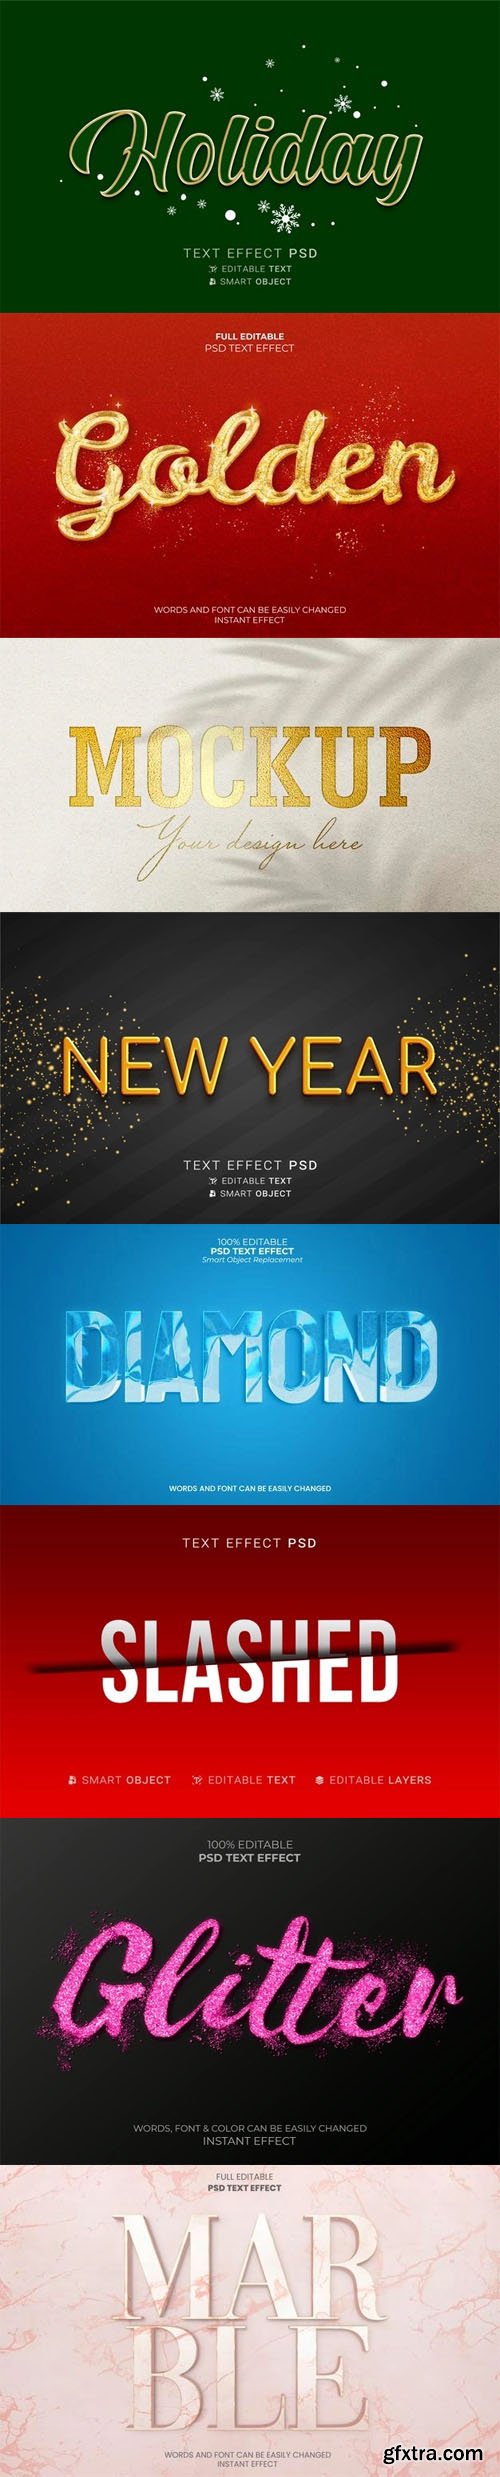 10+ Modern Creative Text Effect Templates for Photoshop